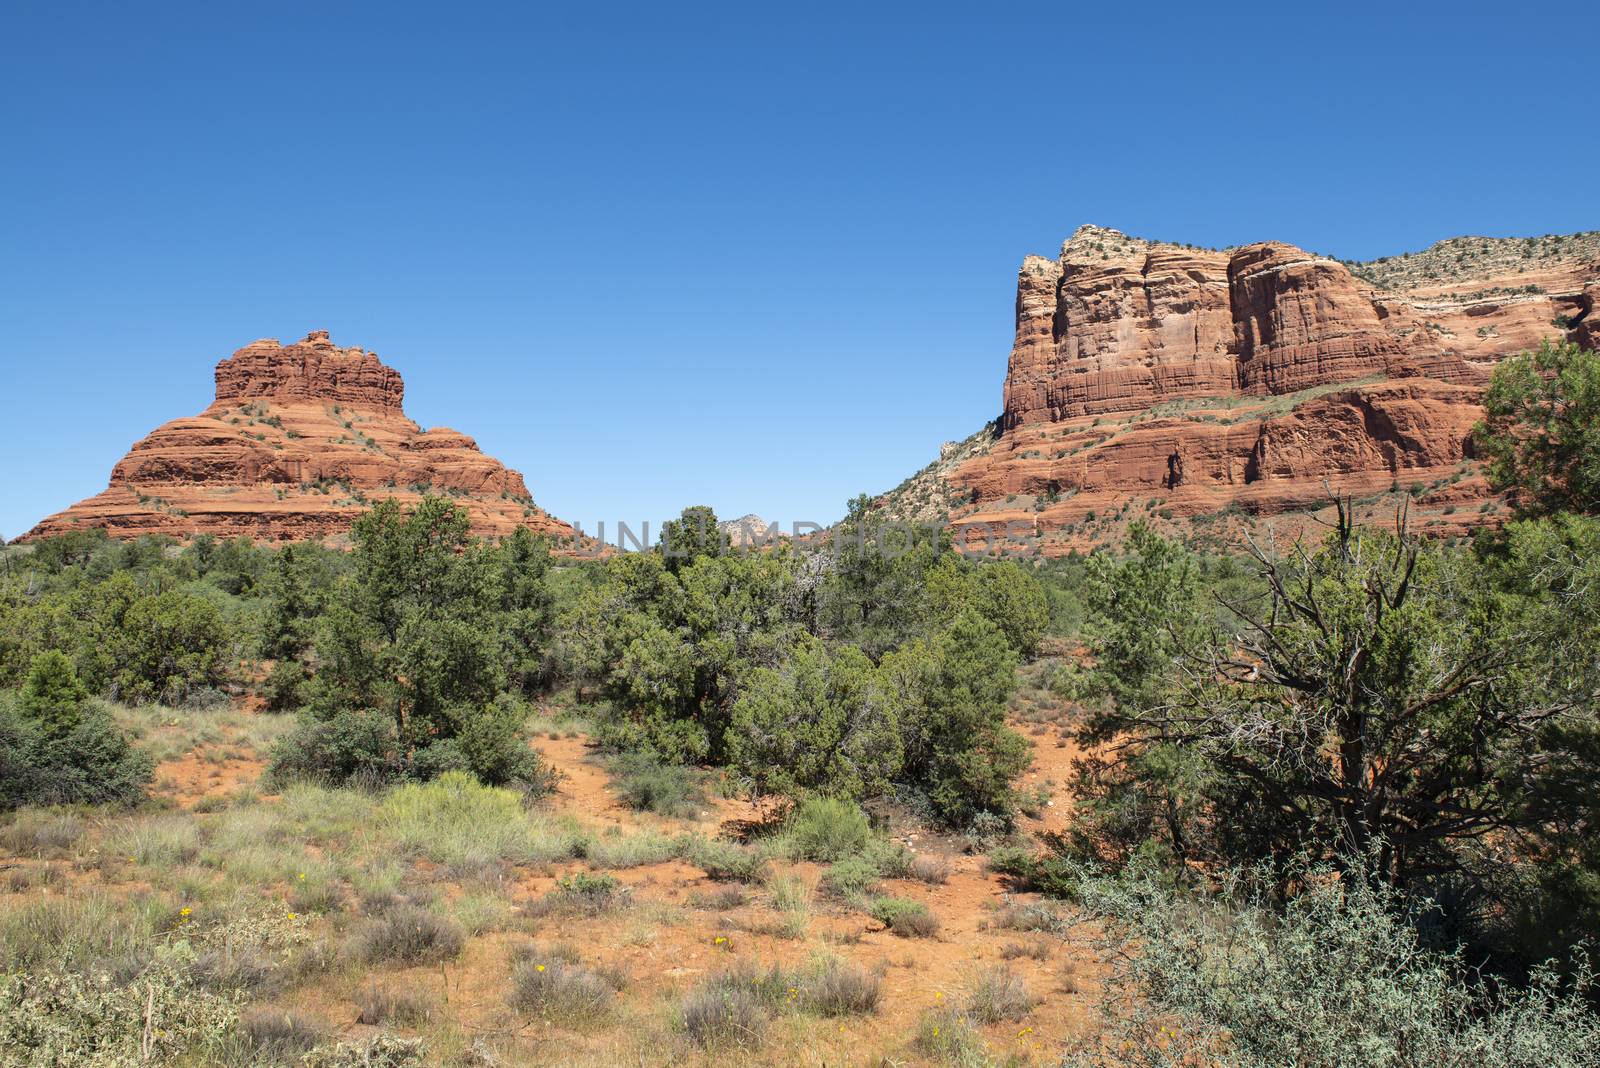 View of Bell Rock and Courthouse Butte from Red Rock Scenic Byway in Sedona, Arizona